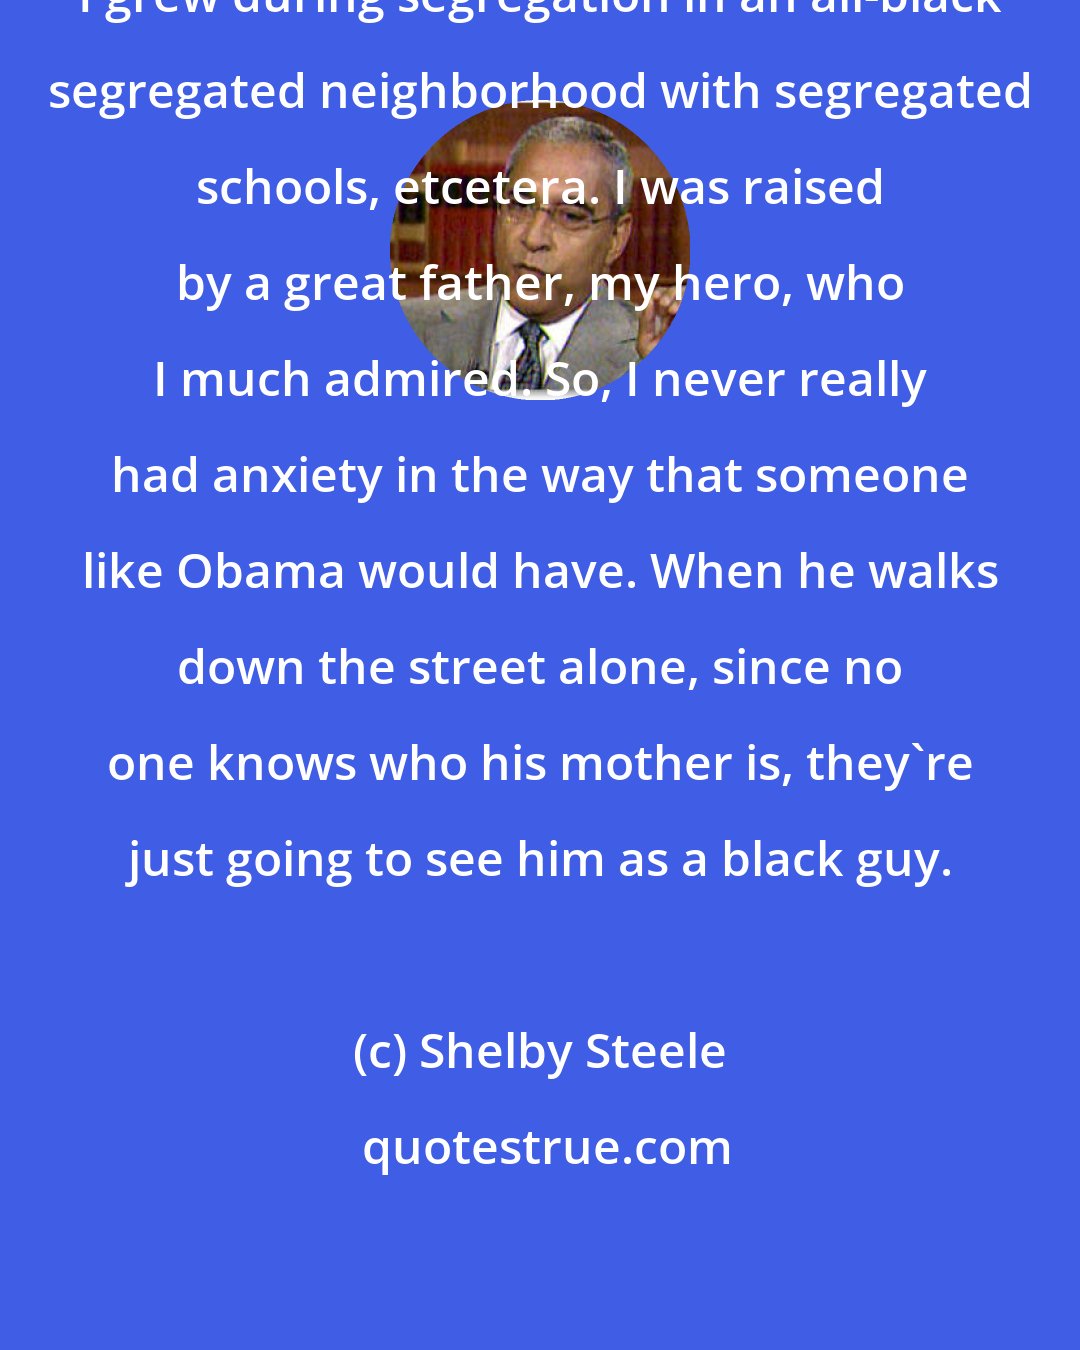 Shelby Steele: I grew during segregation in an all-black segregated neighborhood with segregated schools, etcetera. I was raised by a great father, my hero, who I much admired. So, I never really had anxiety in the way that someone like Obama would have. When he walks down the street alone, since no one knows who his mother is, they're just going to see him as a black guy.